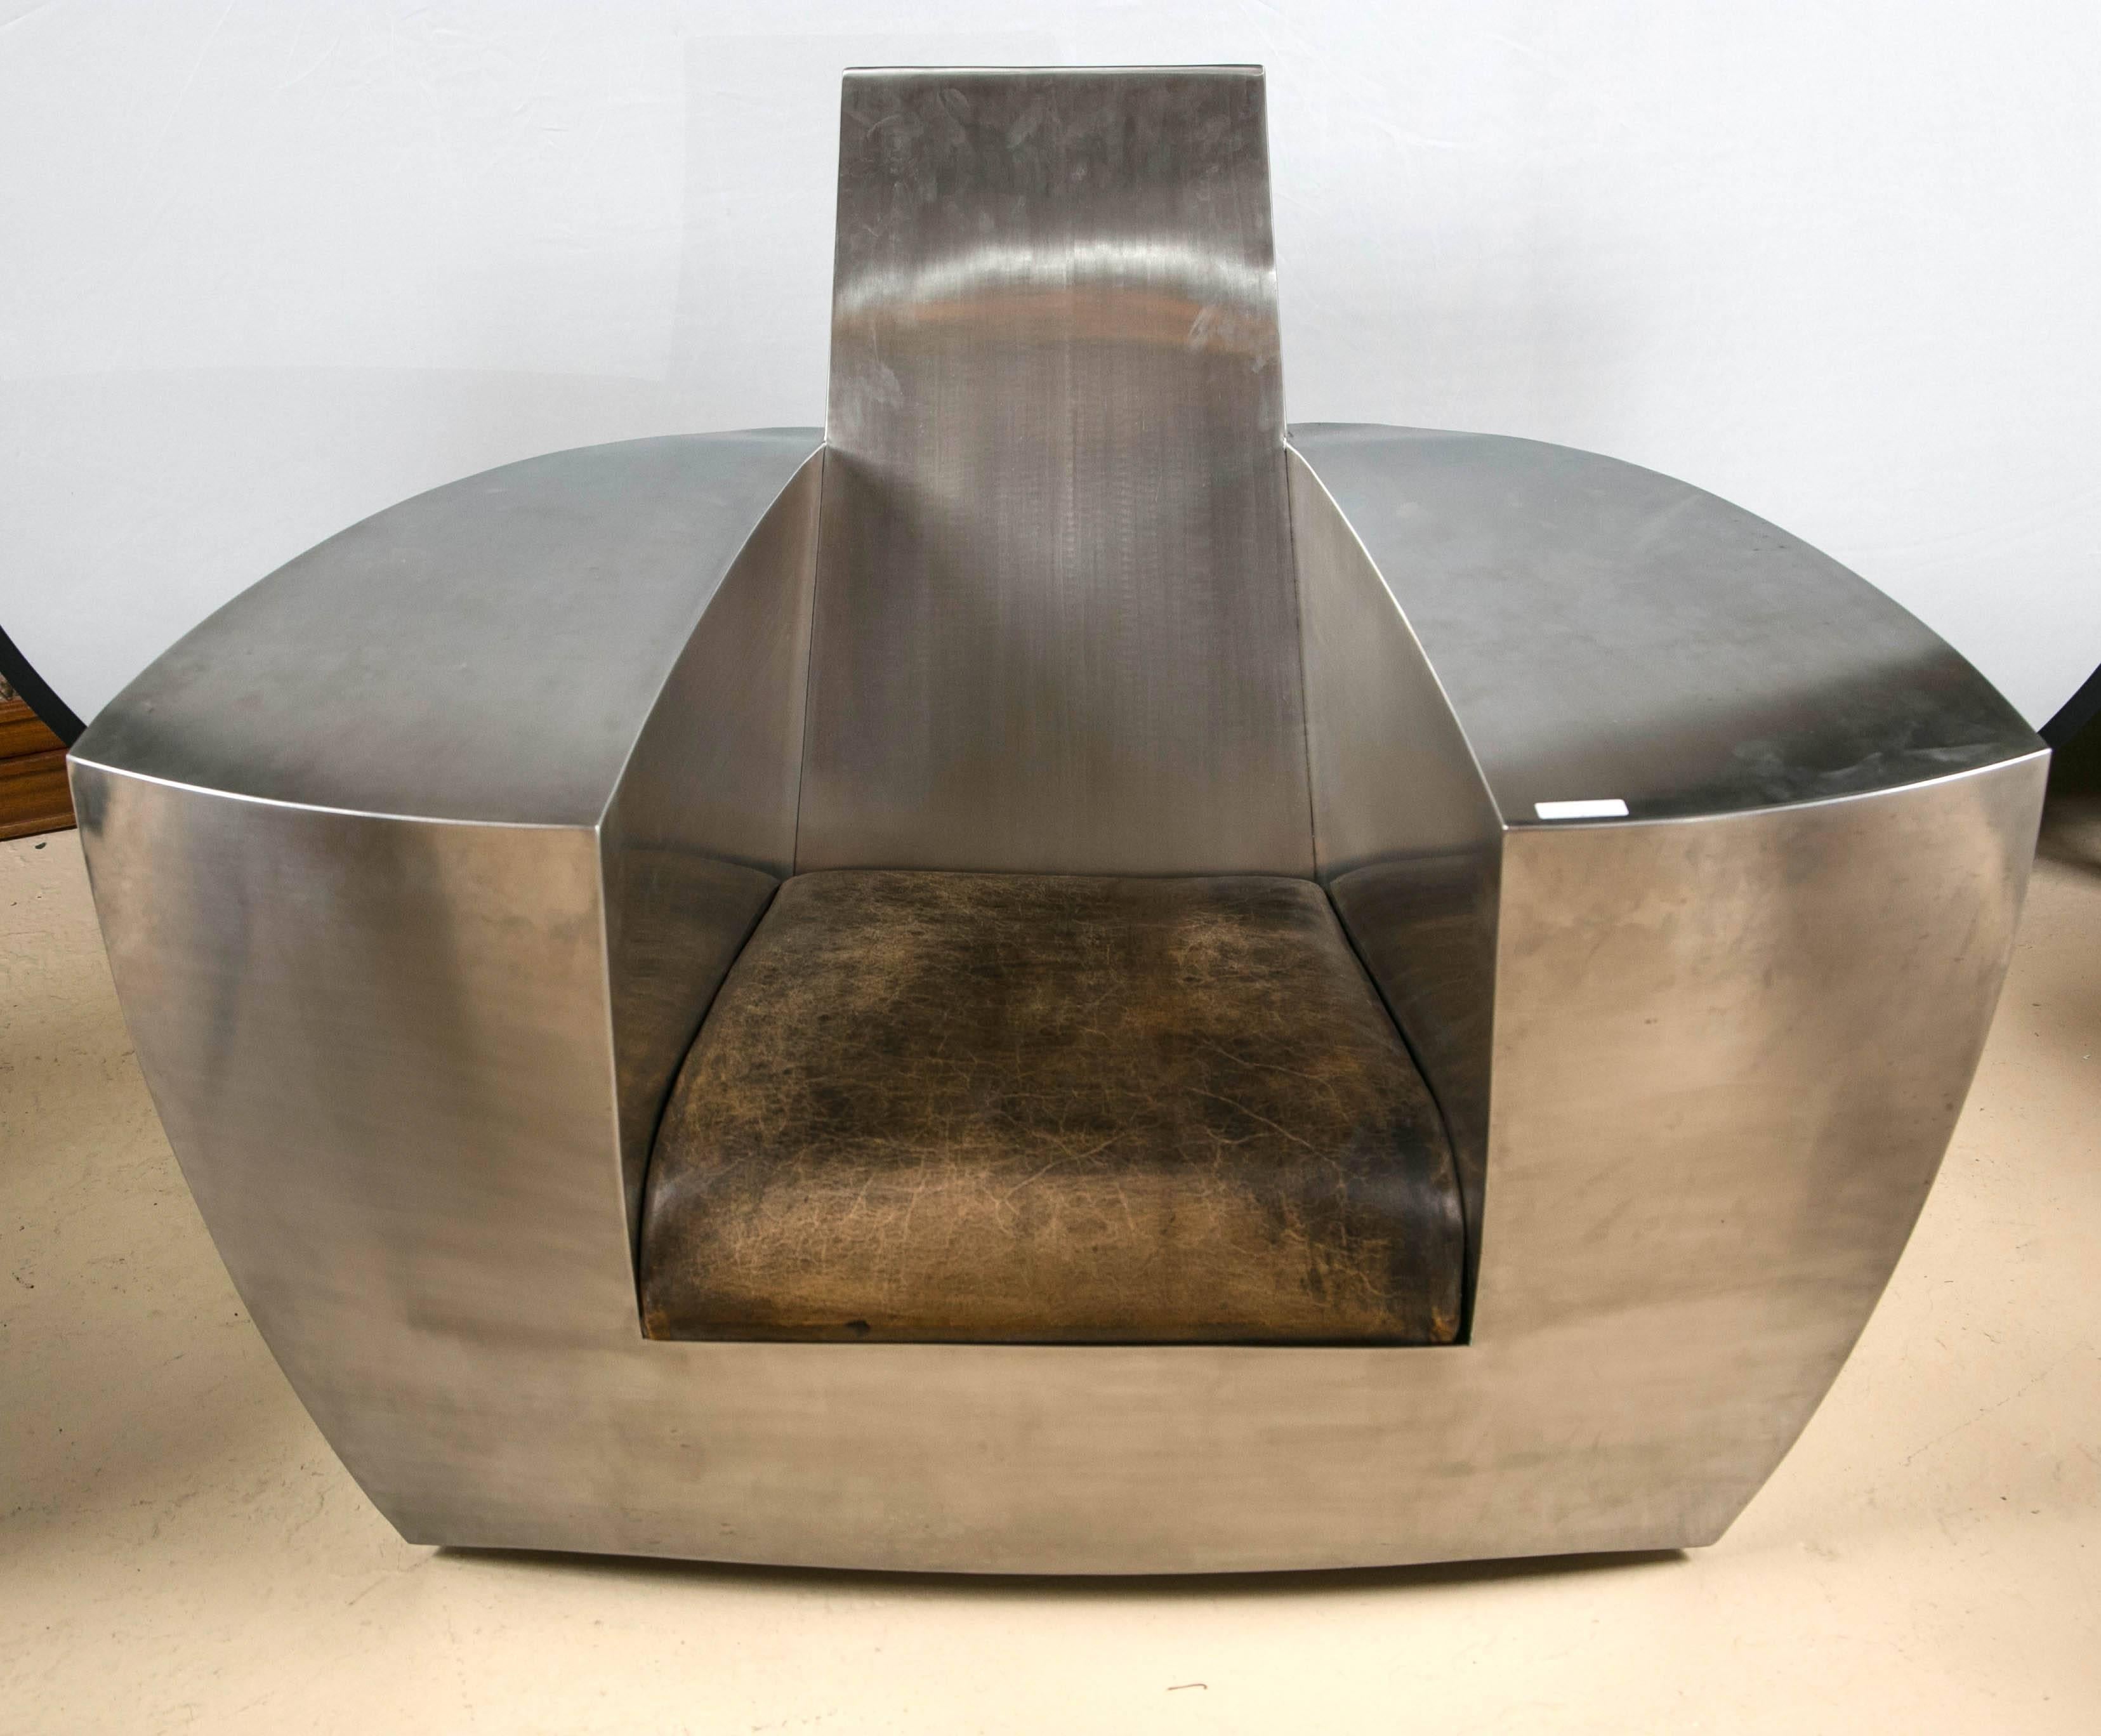 Jonathan Singleton easy number one chair, Spain, 1990s. Stainless steel and leather. Unique style and design. Comfortable and funky.

1/2NM